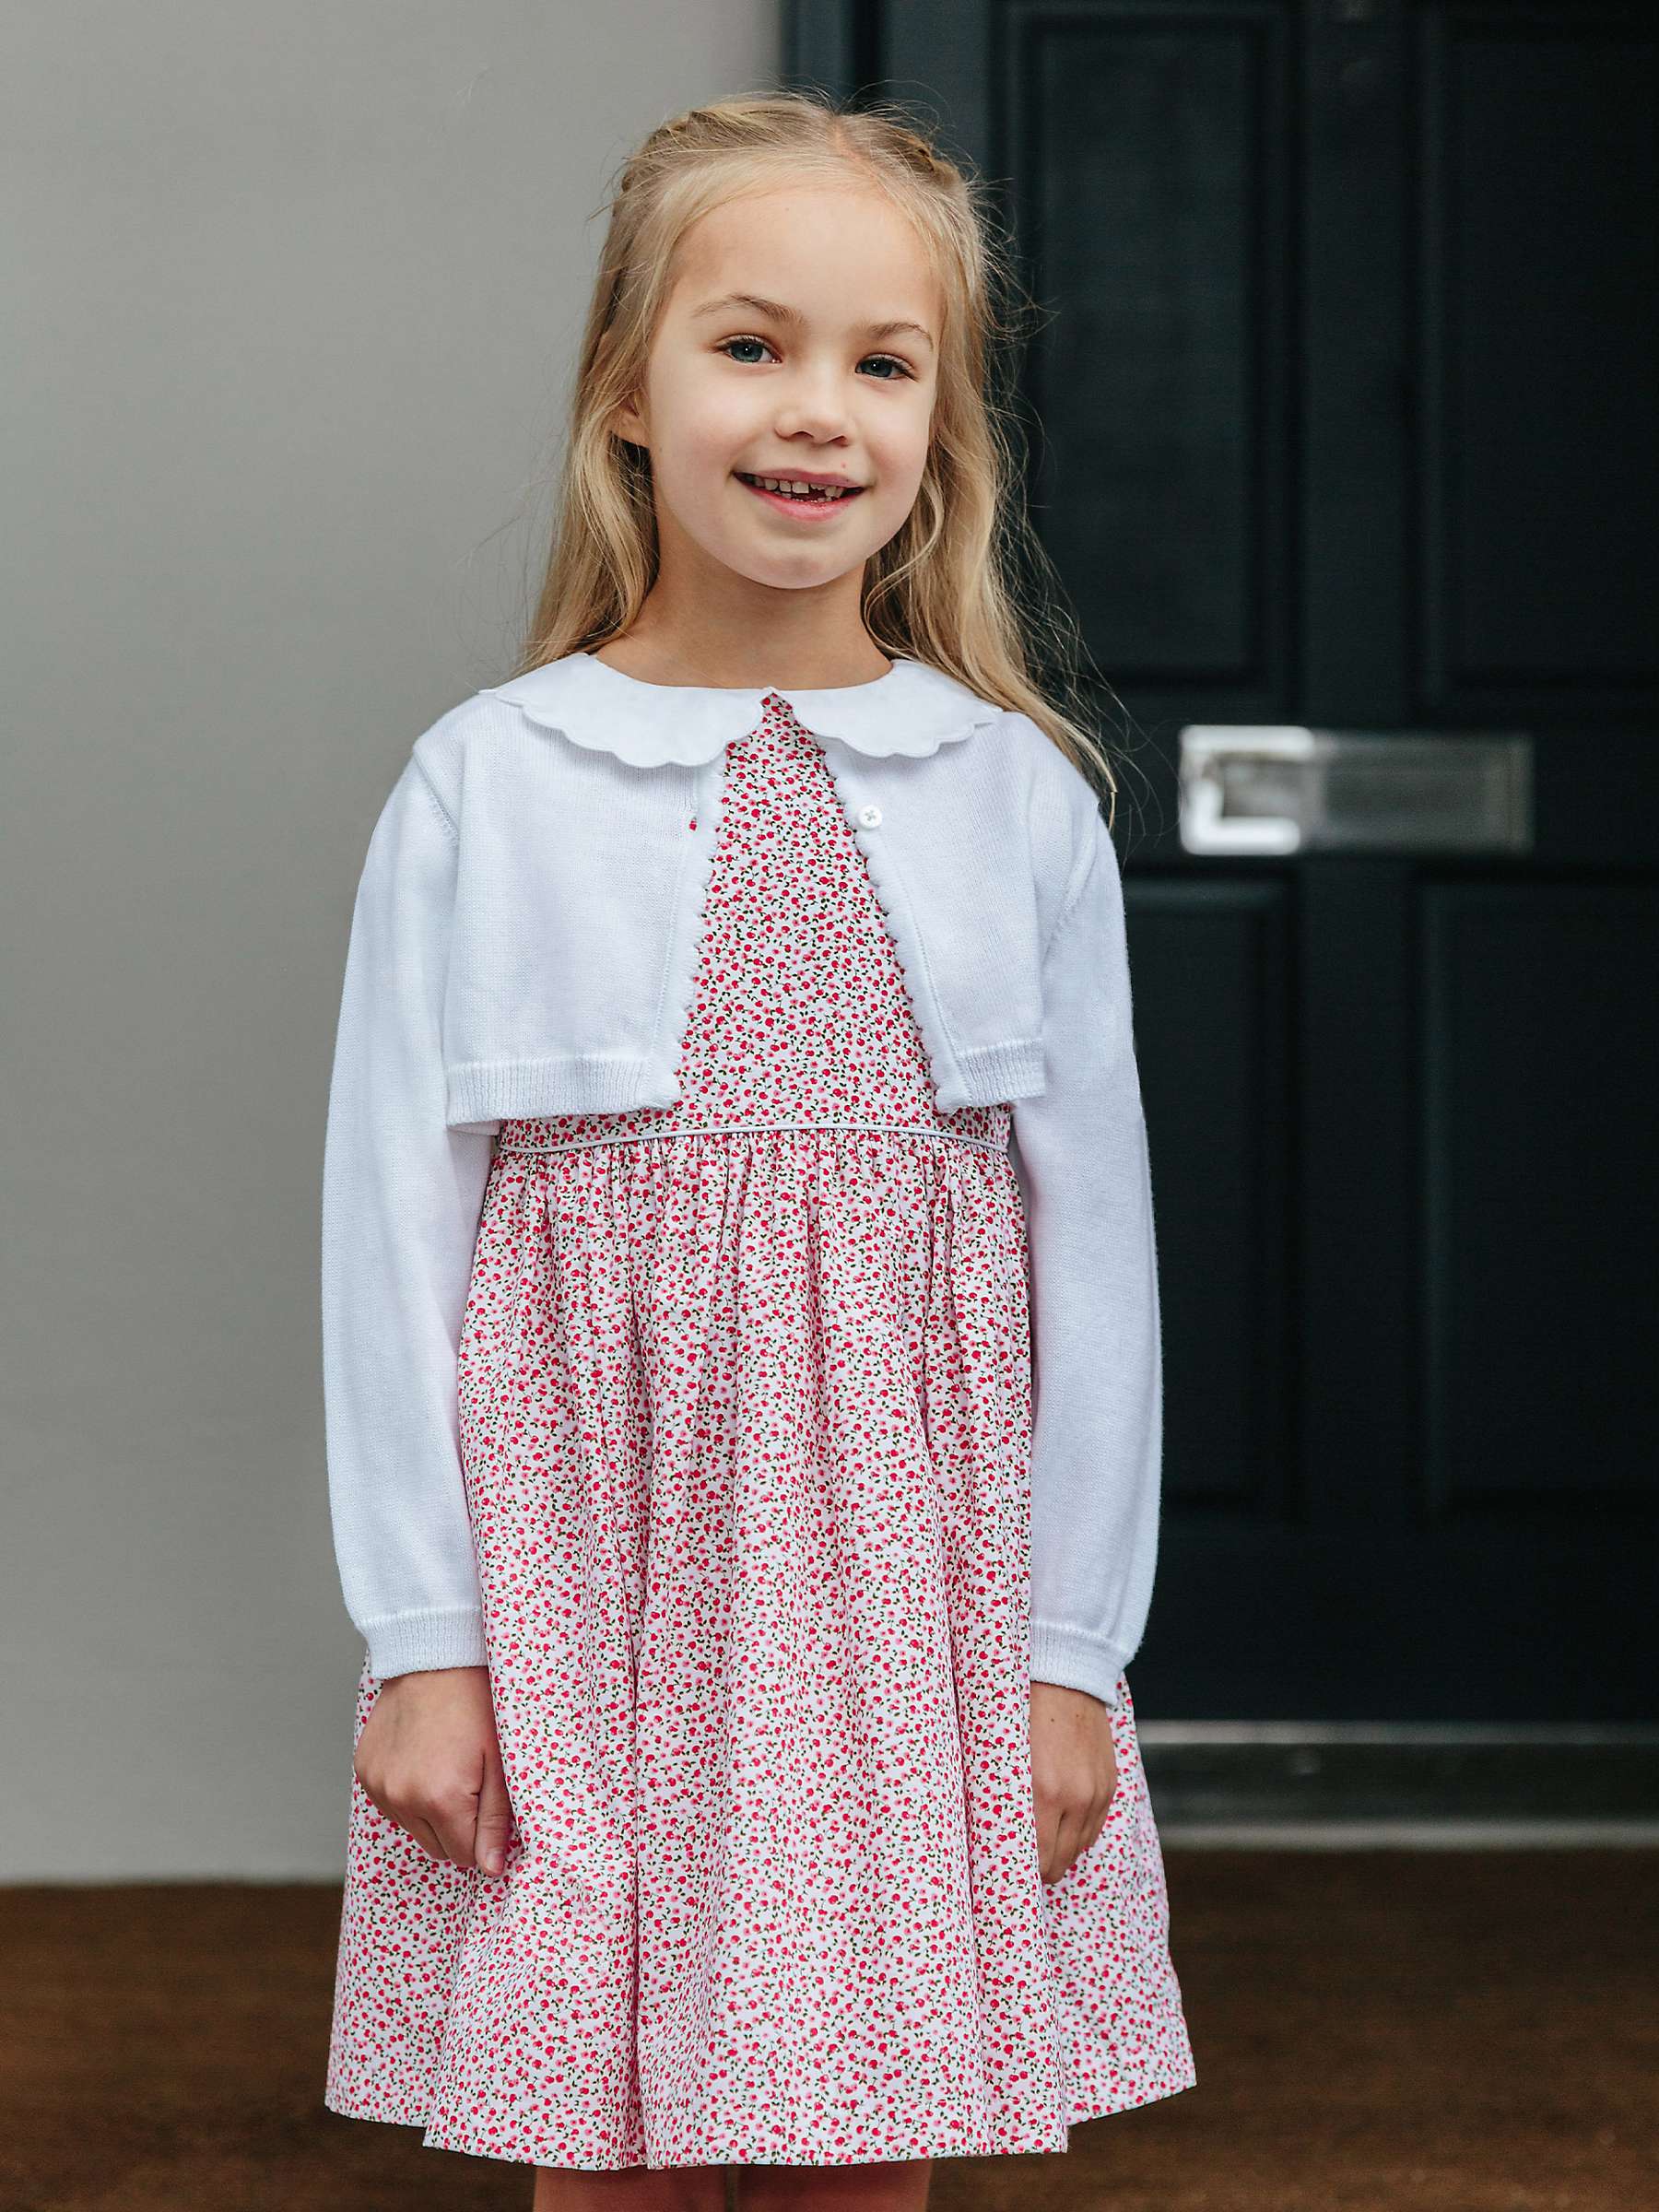 Buy Trotters Kids' Sophie Cropped Cardigan, White Online at johnlewis.com